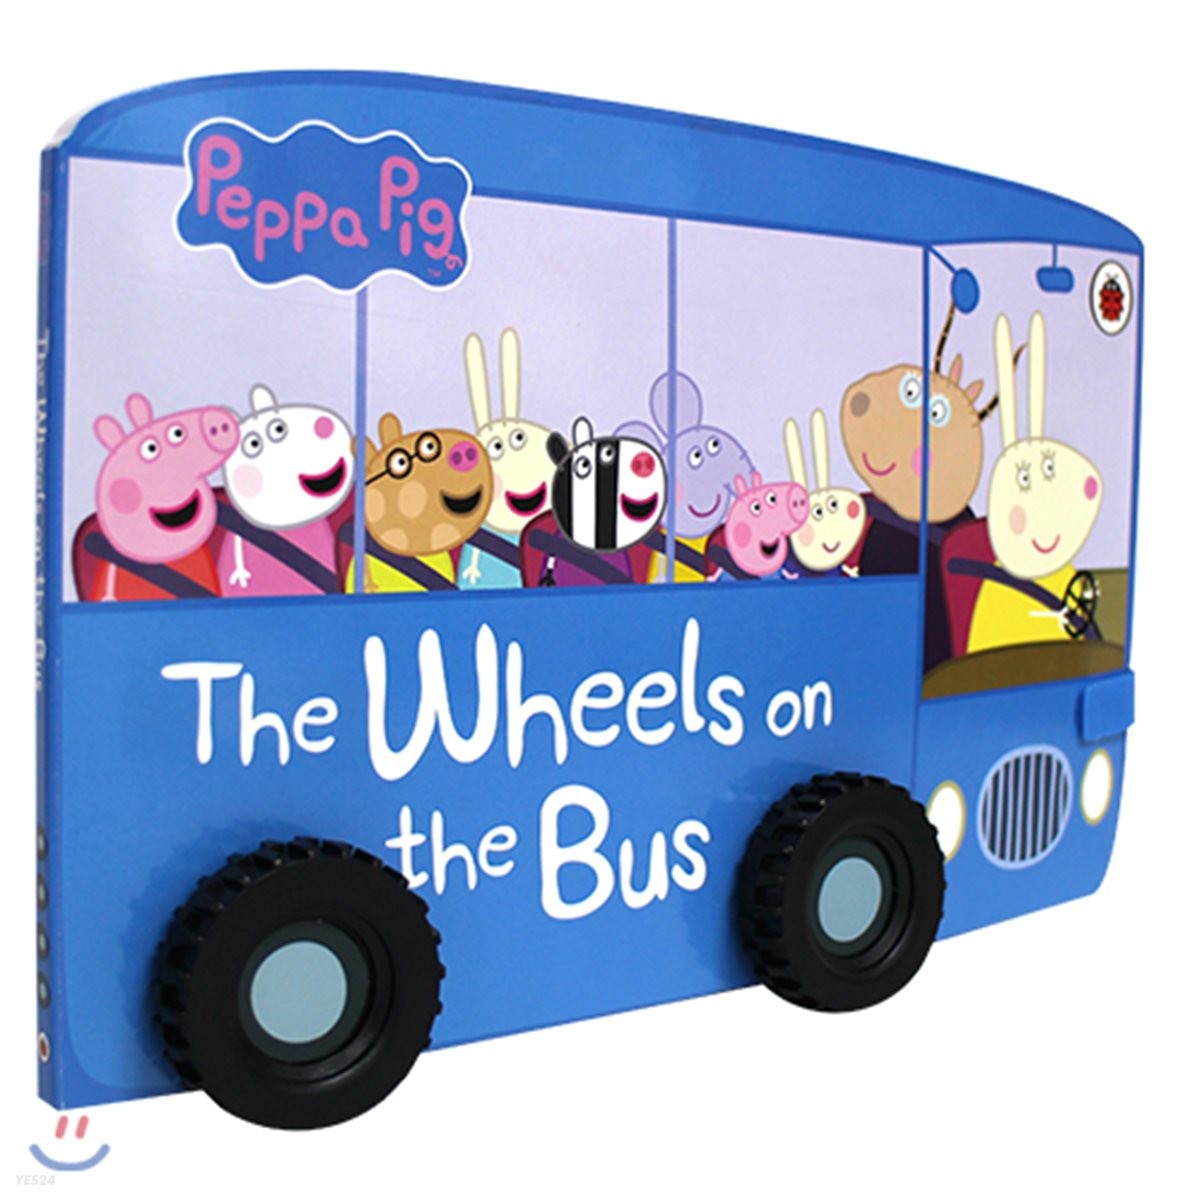 (Peppa Pig)The Wheels on the Bus 표지